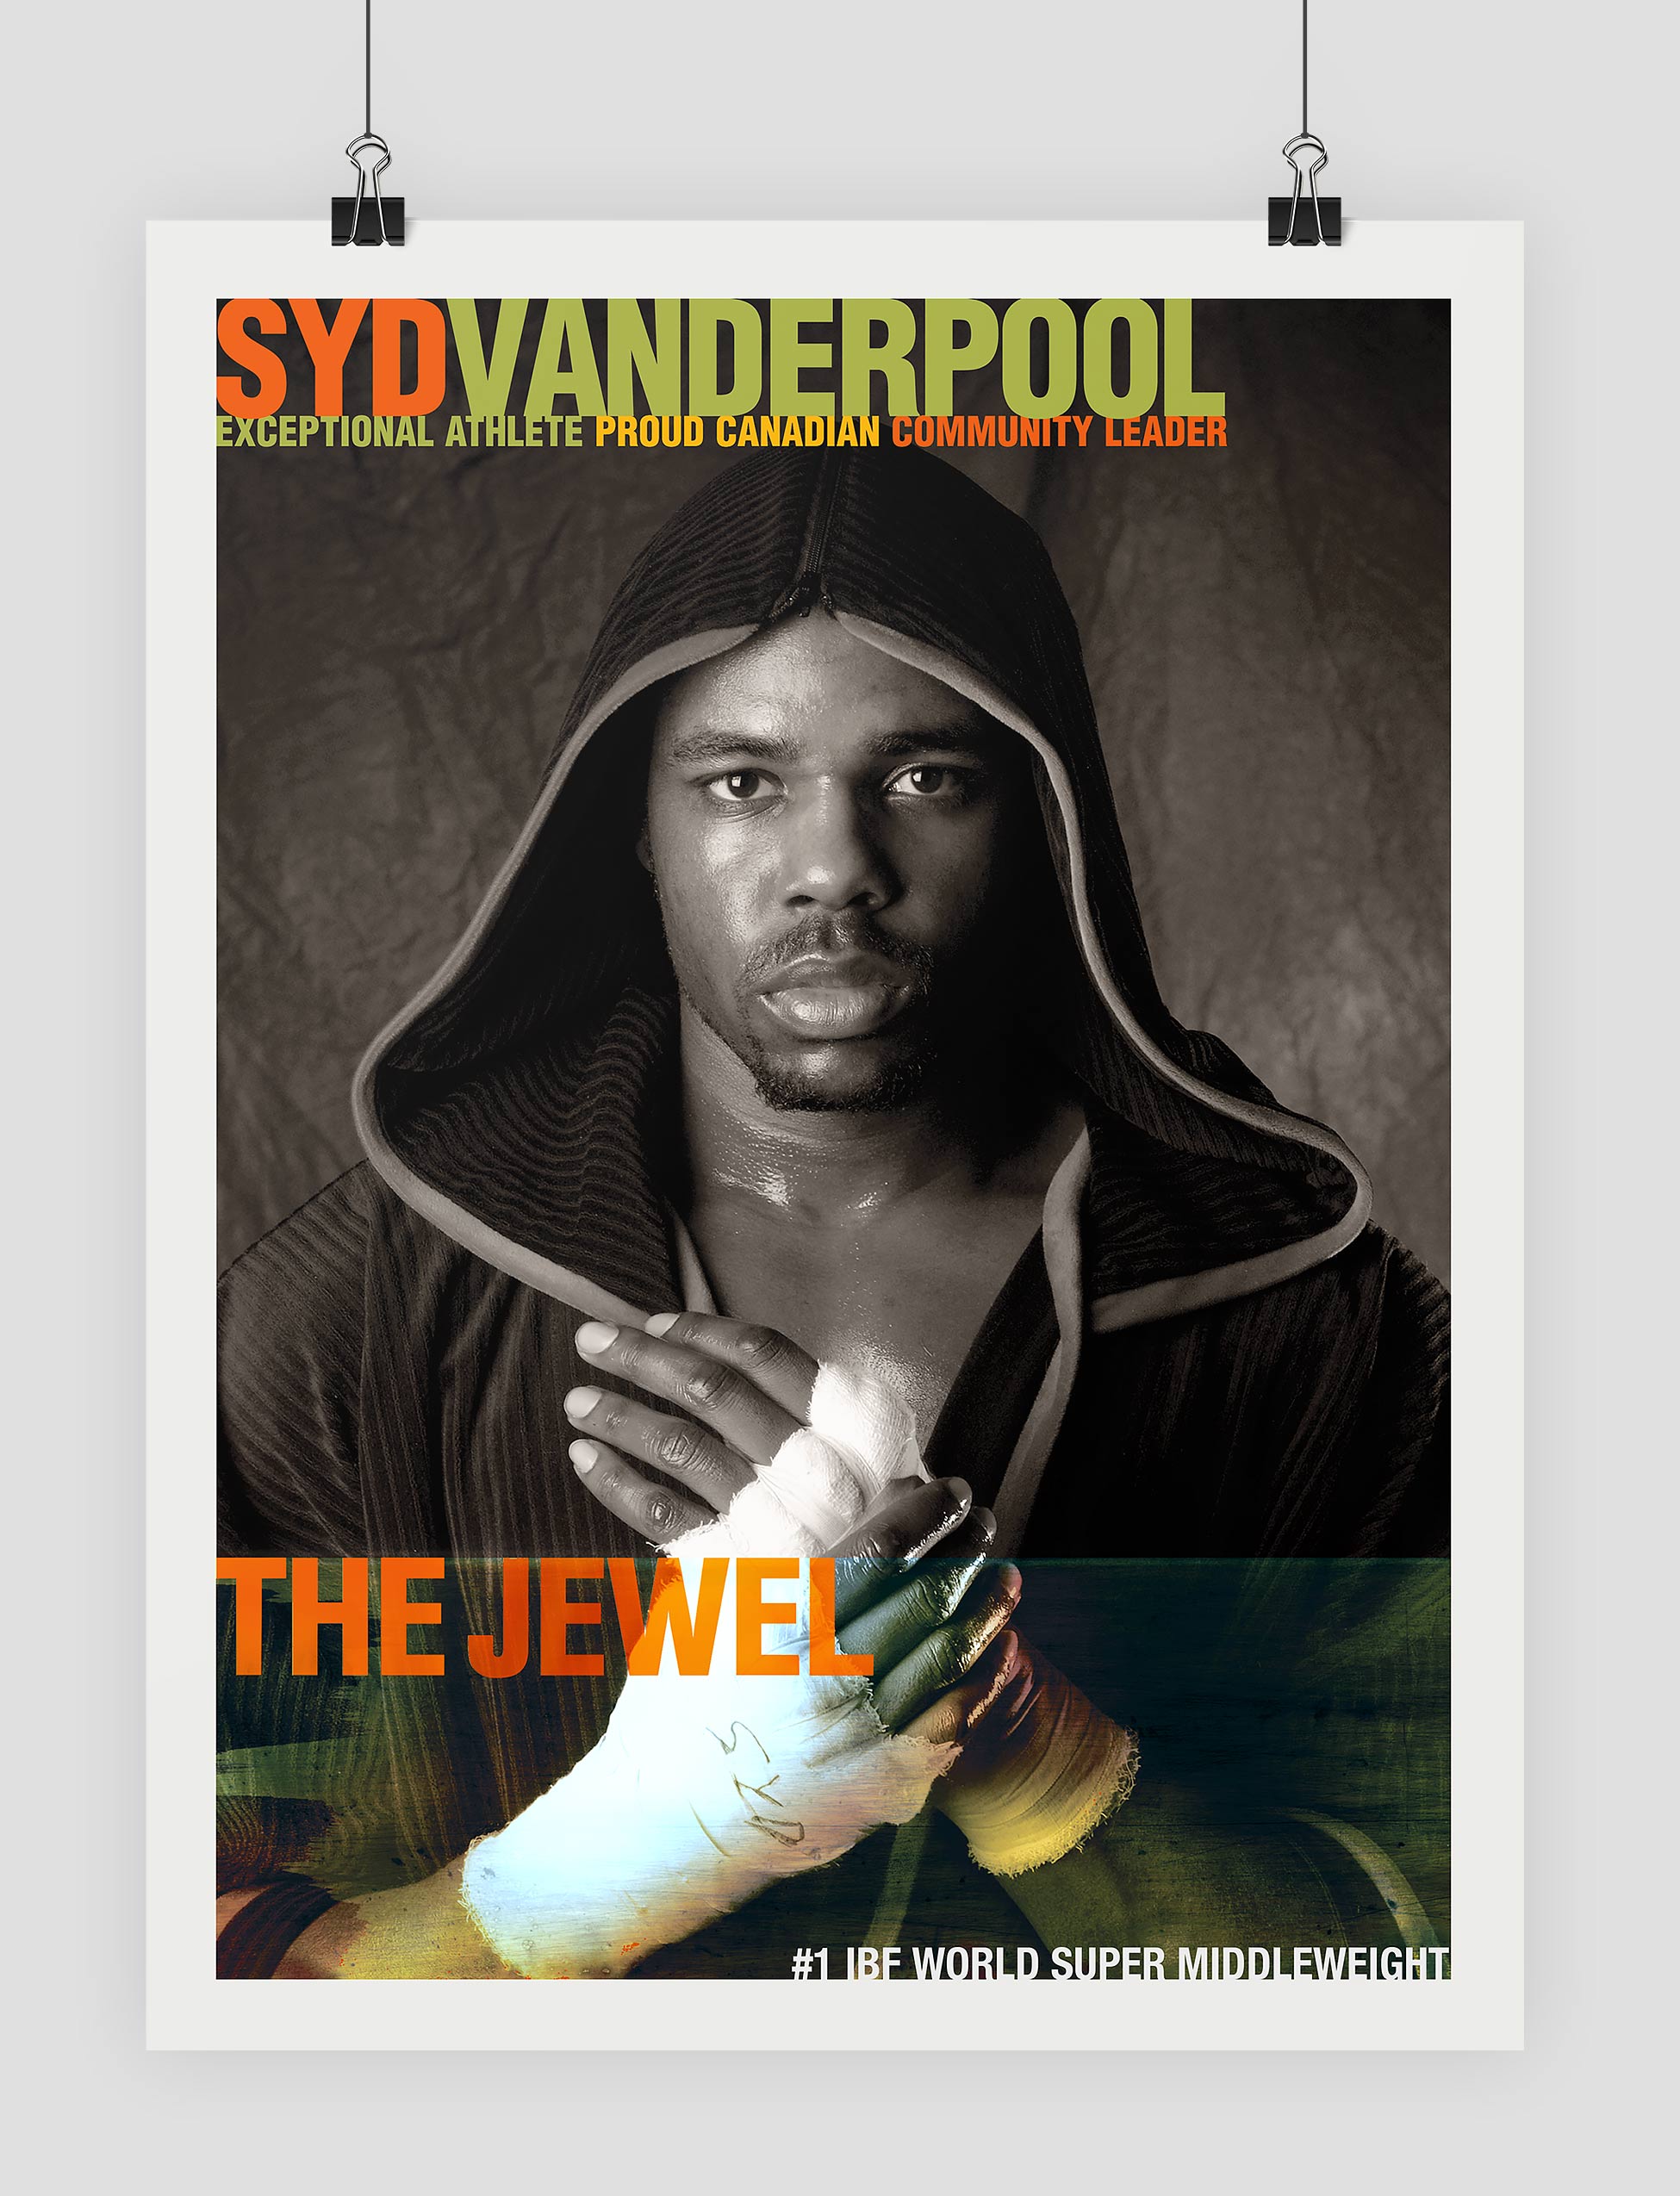 ip pm Syd Vanderpool boxing photography poster mockup by design direction llc